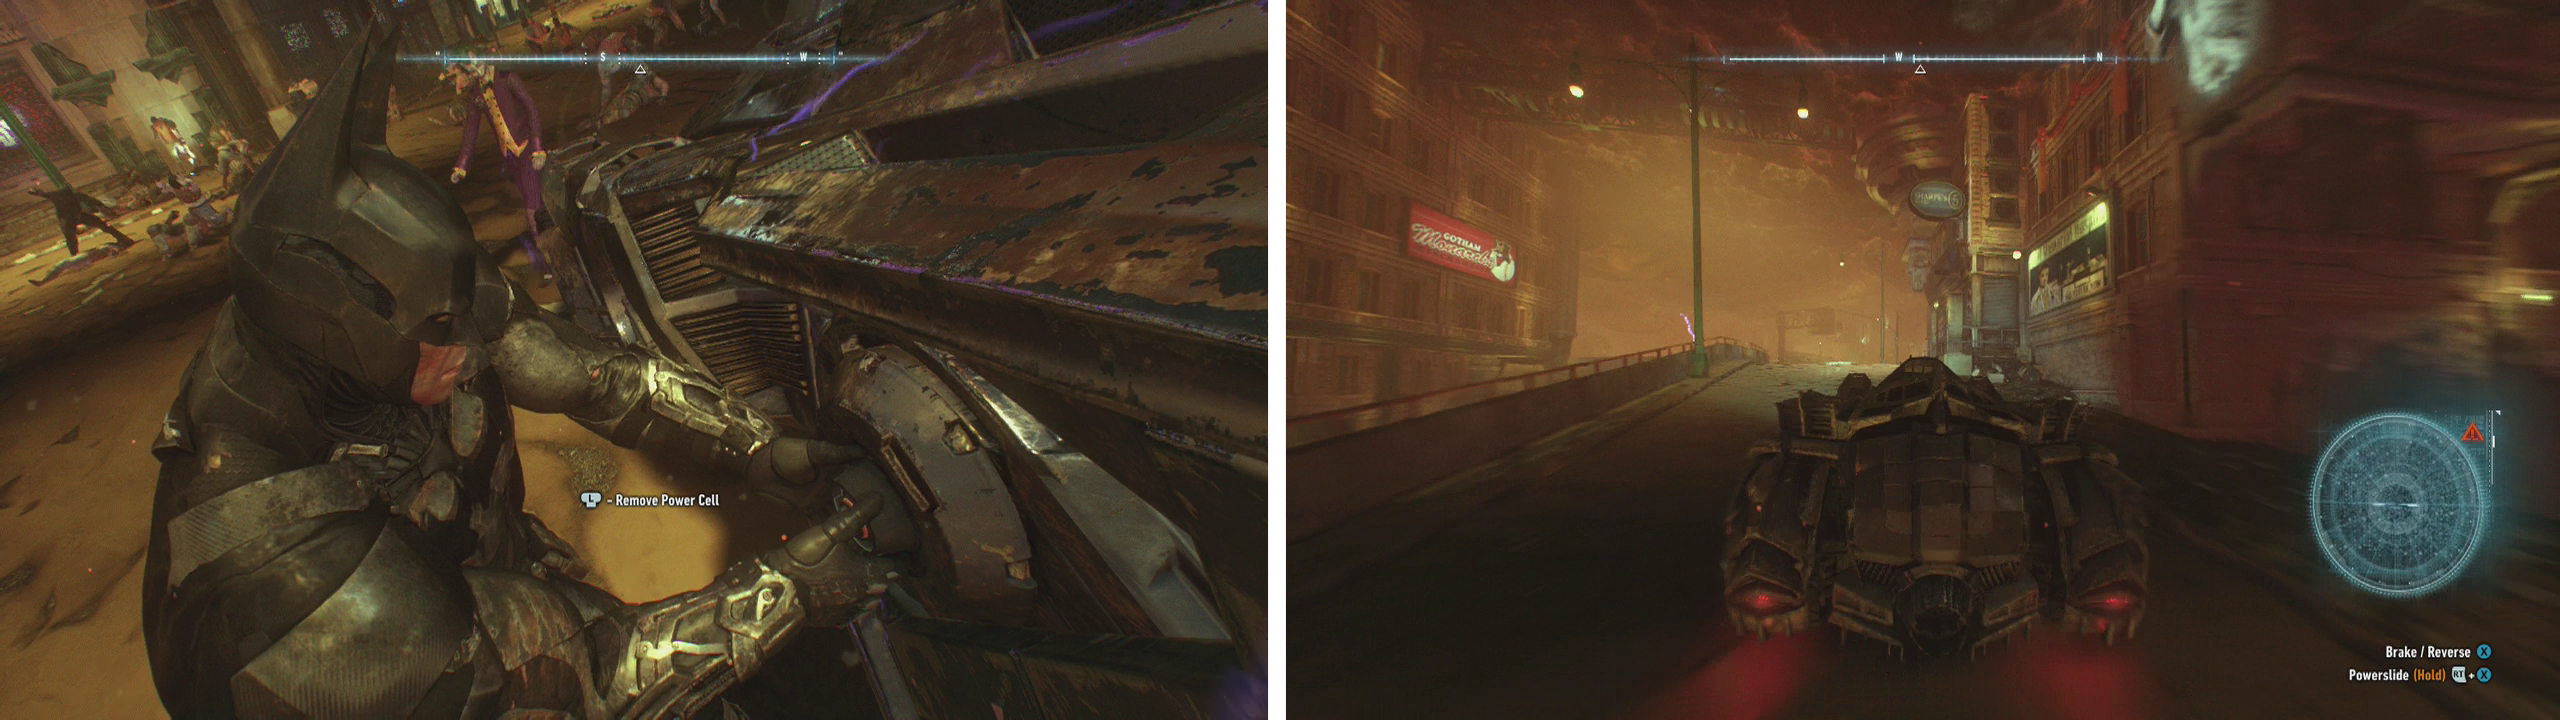 Exit the airship and fly over the objective marker (left). Remove the cylinder from the Batmobile and replace it (right).